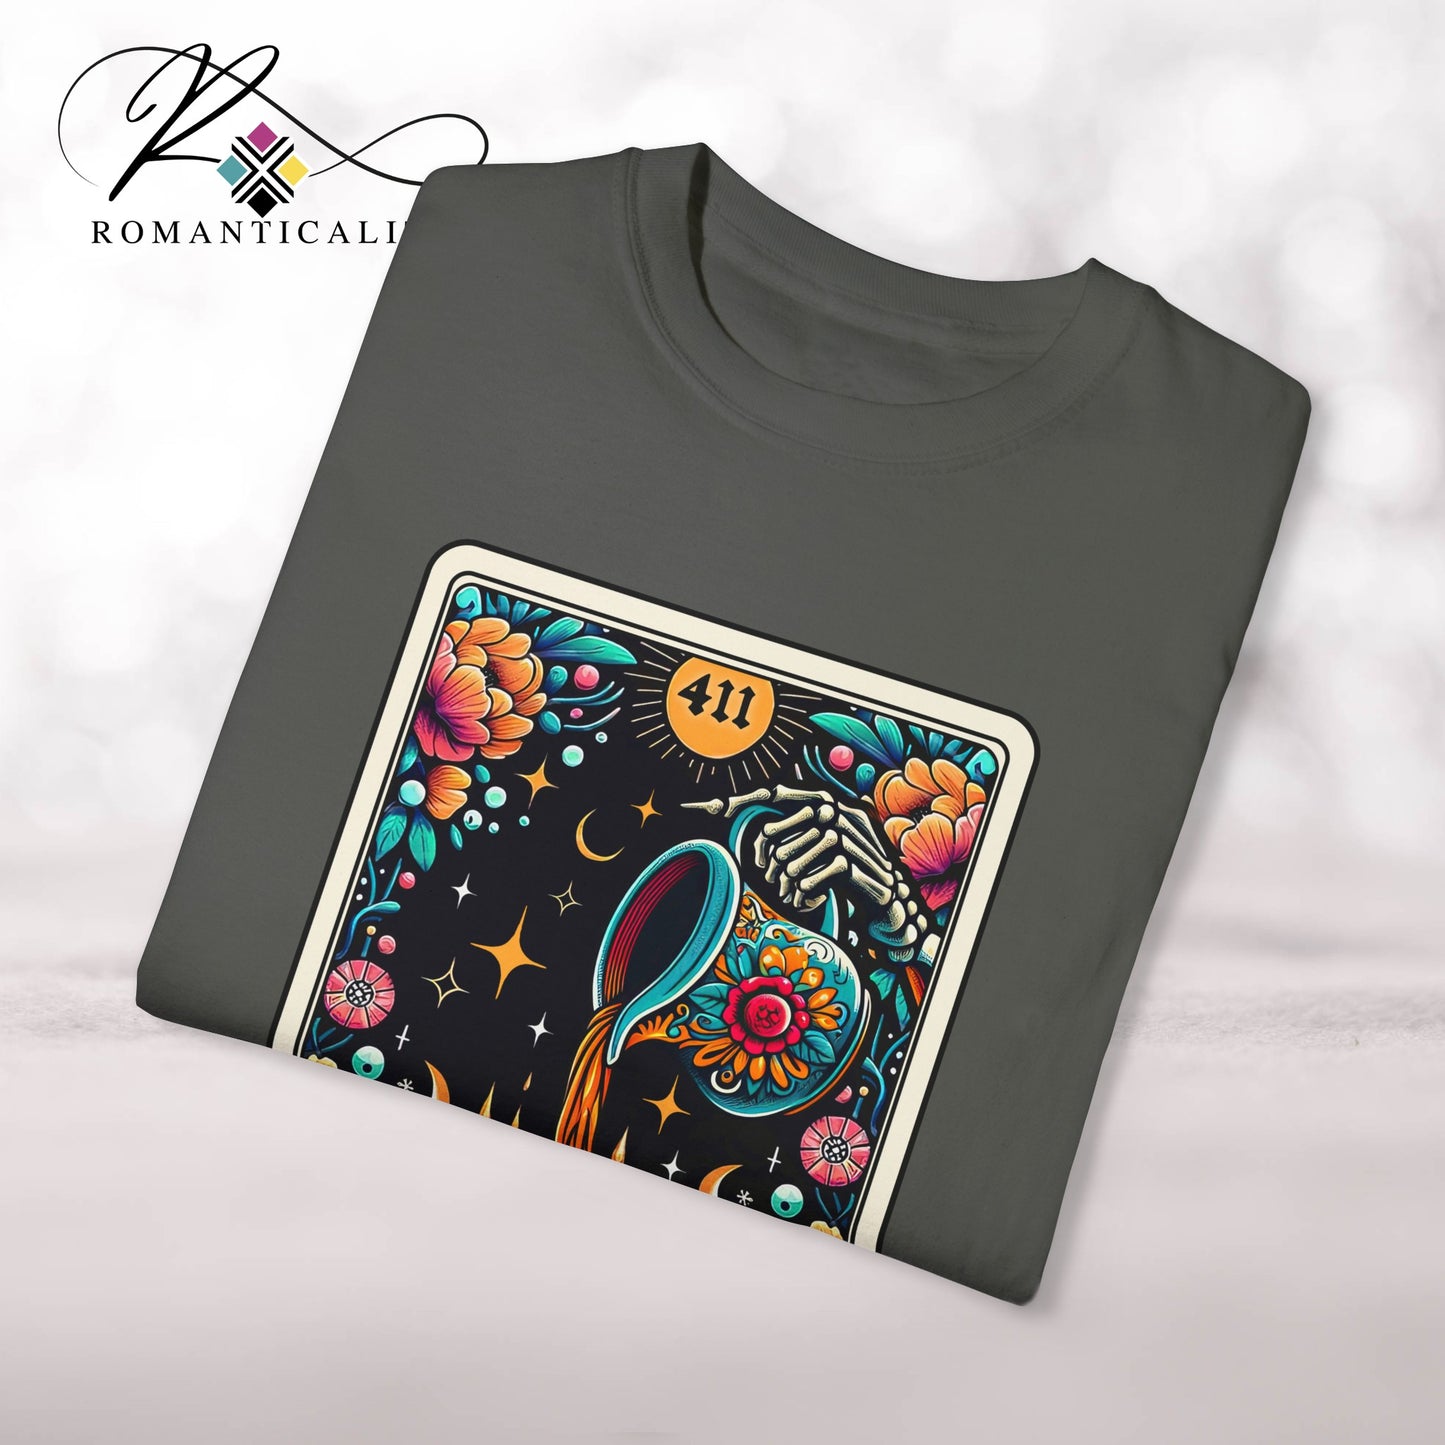 The Spilled Tea Graphic Top-Sassy Woman Tee-Tarot Card Graphic T-shirt-Women's Graphic T-Shirt-Women's Tarot Card Top-Mother's Day Gift